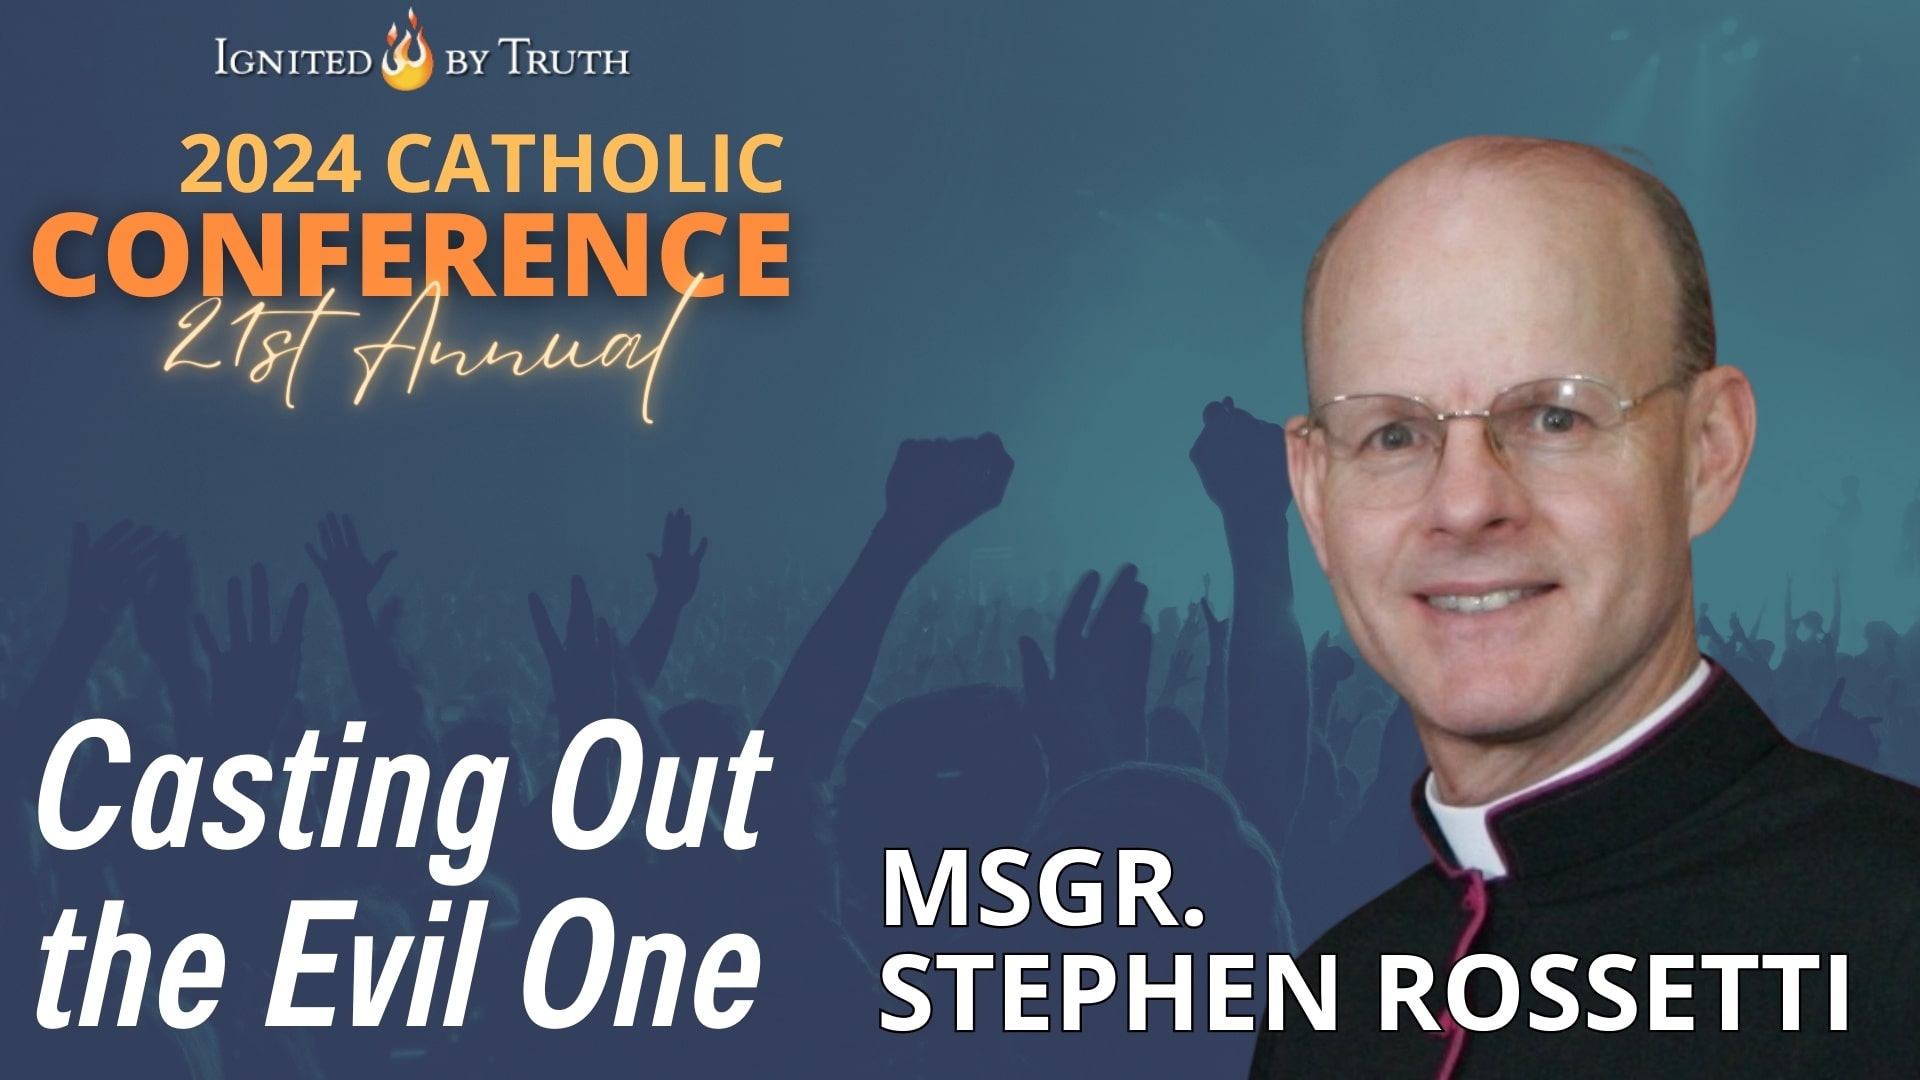 Msgr. Stephen Rossetti: Casting Out the Evil One